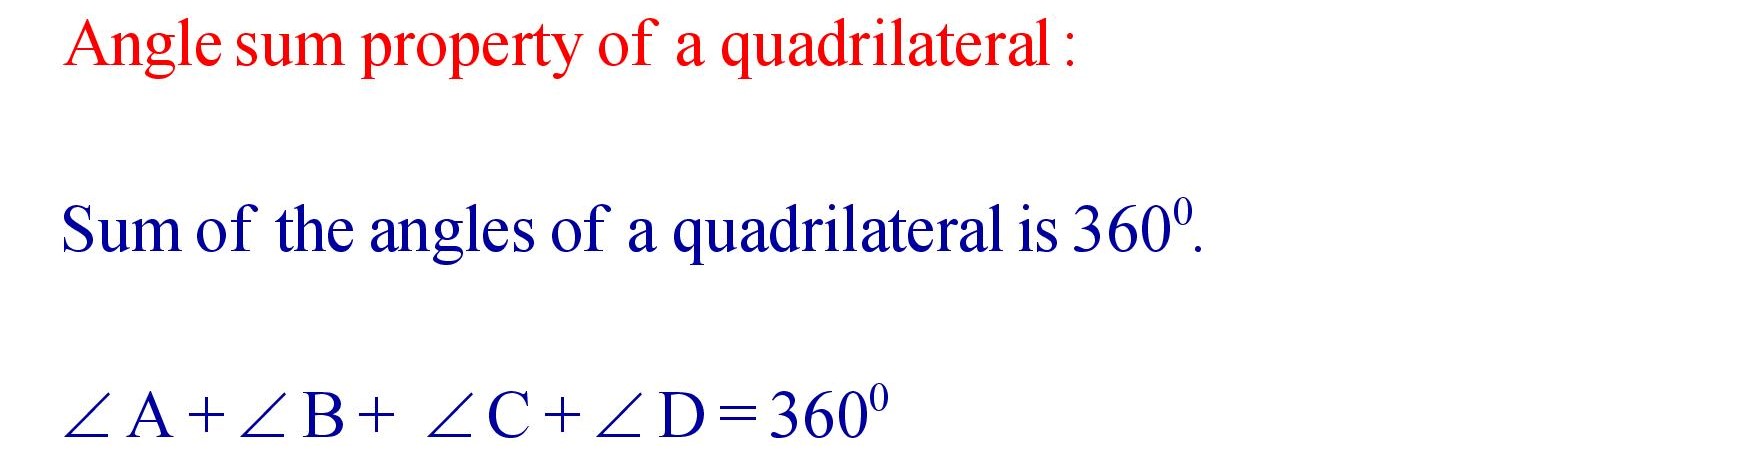 Angle Sum property of a Quadrilateral